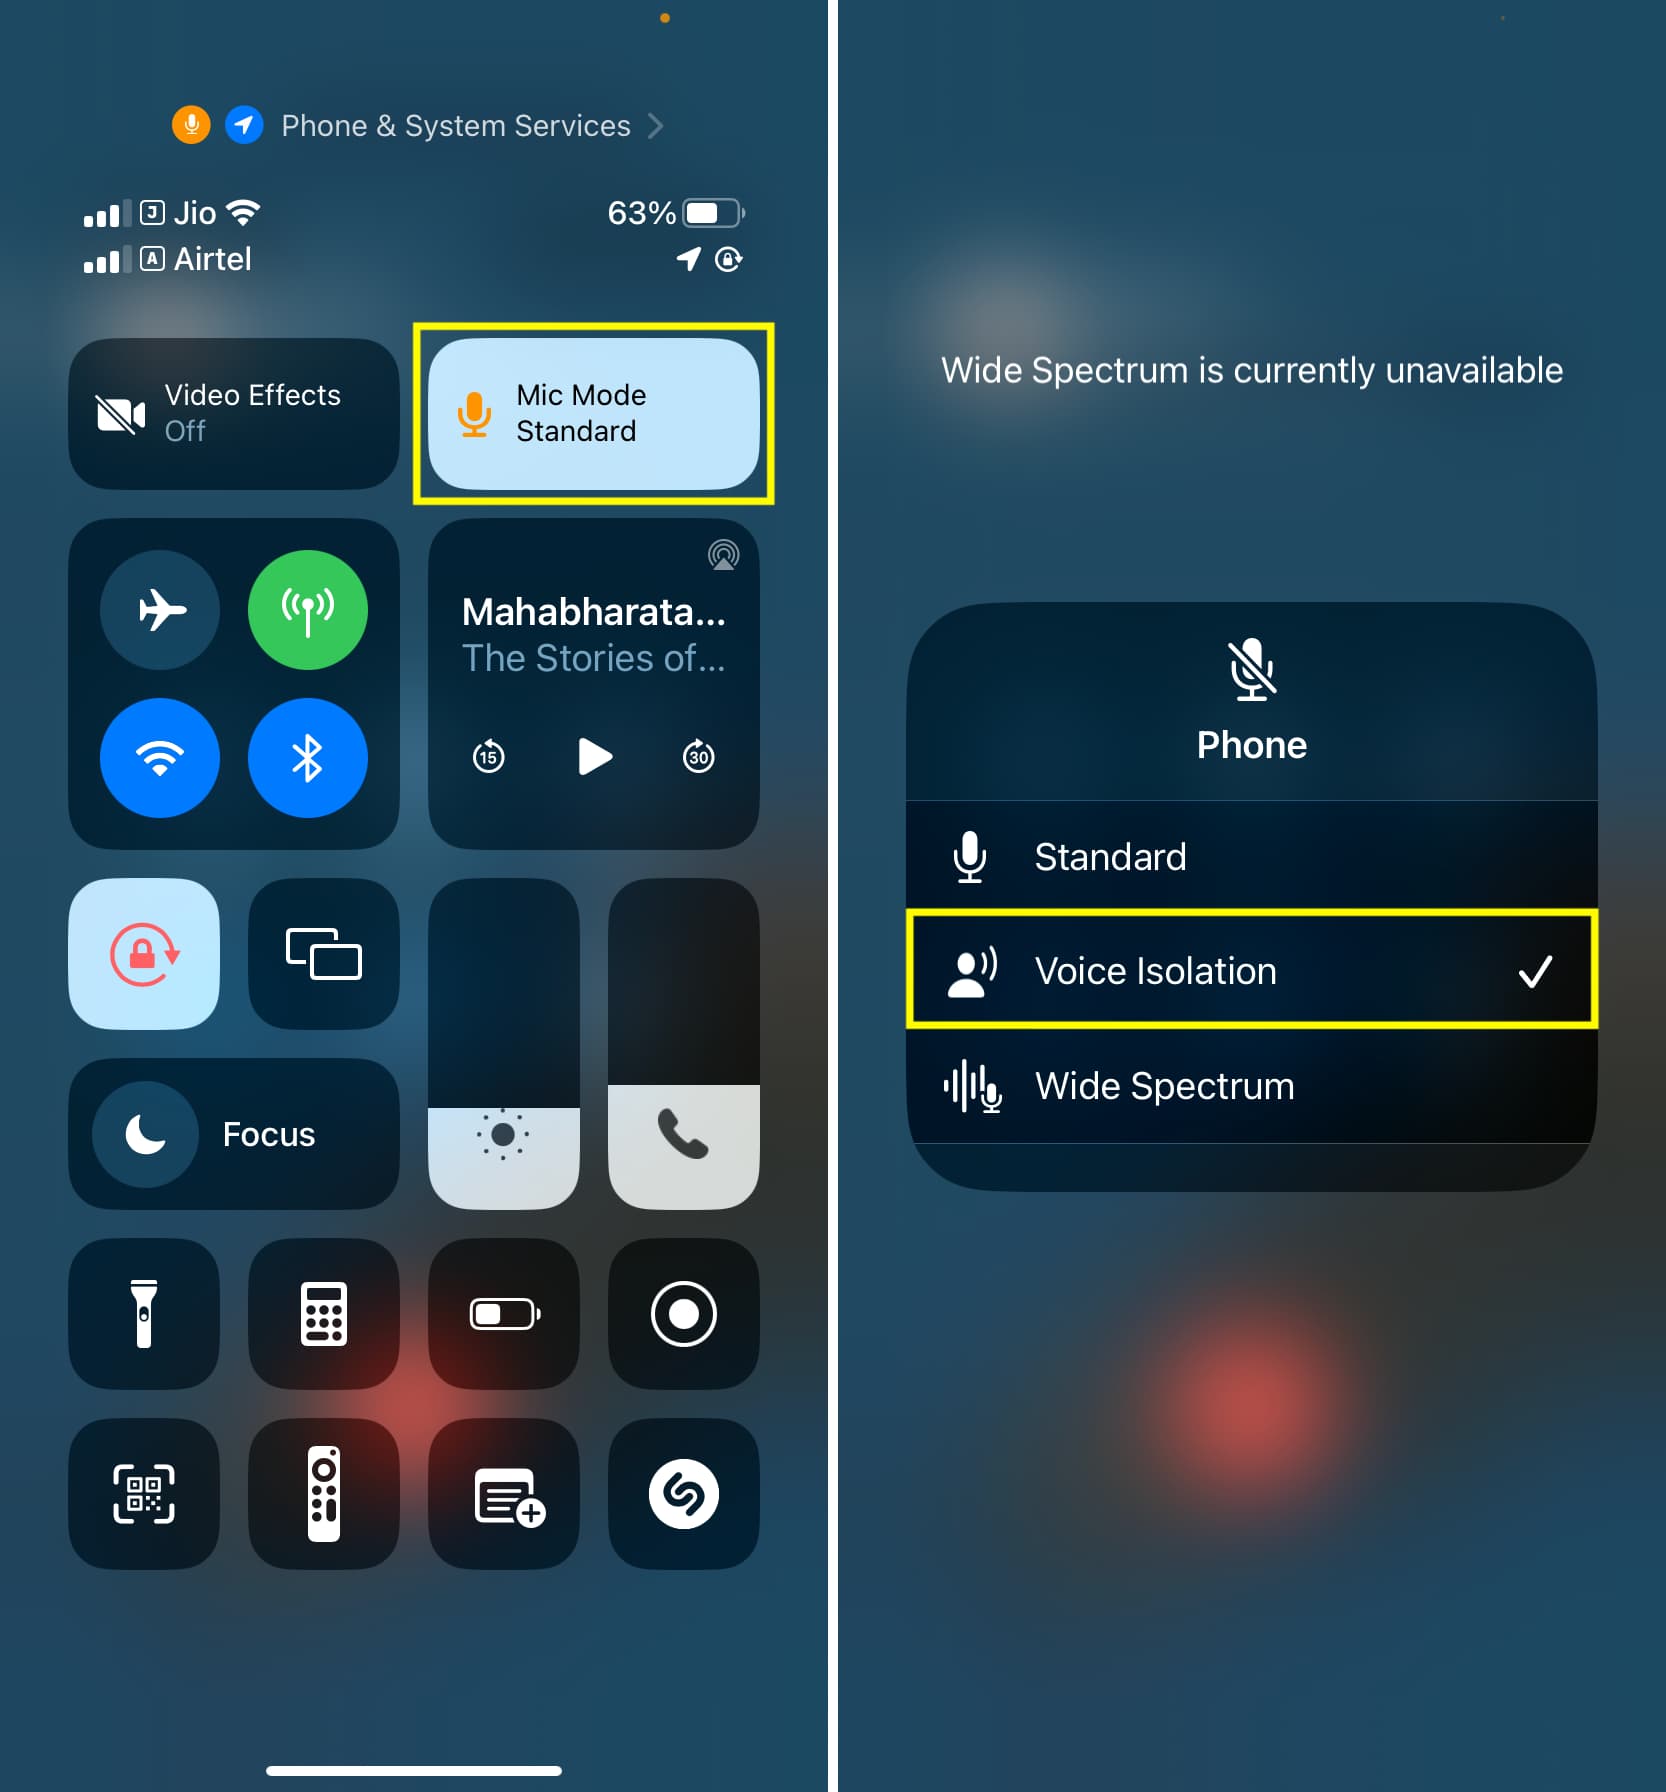 Voice Isolation for phone calls on iPhone to block background sounds